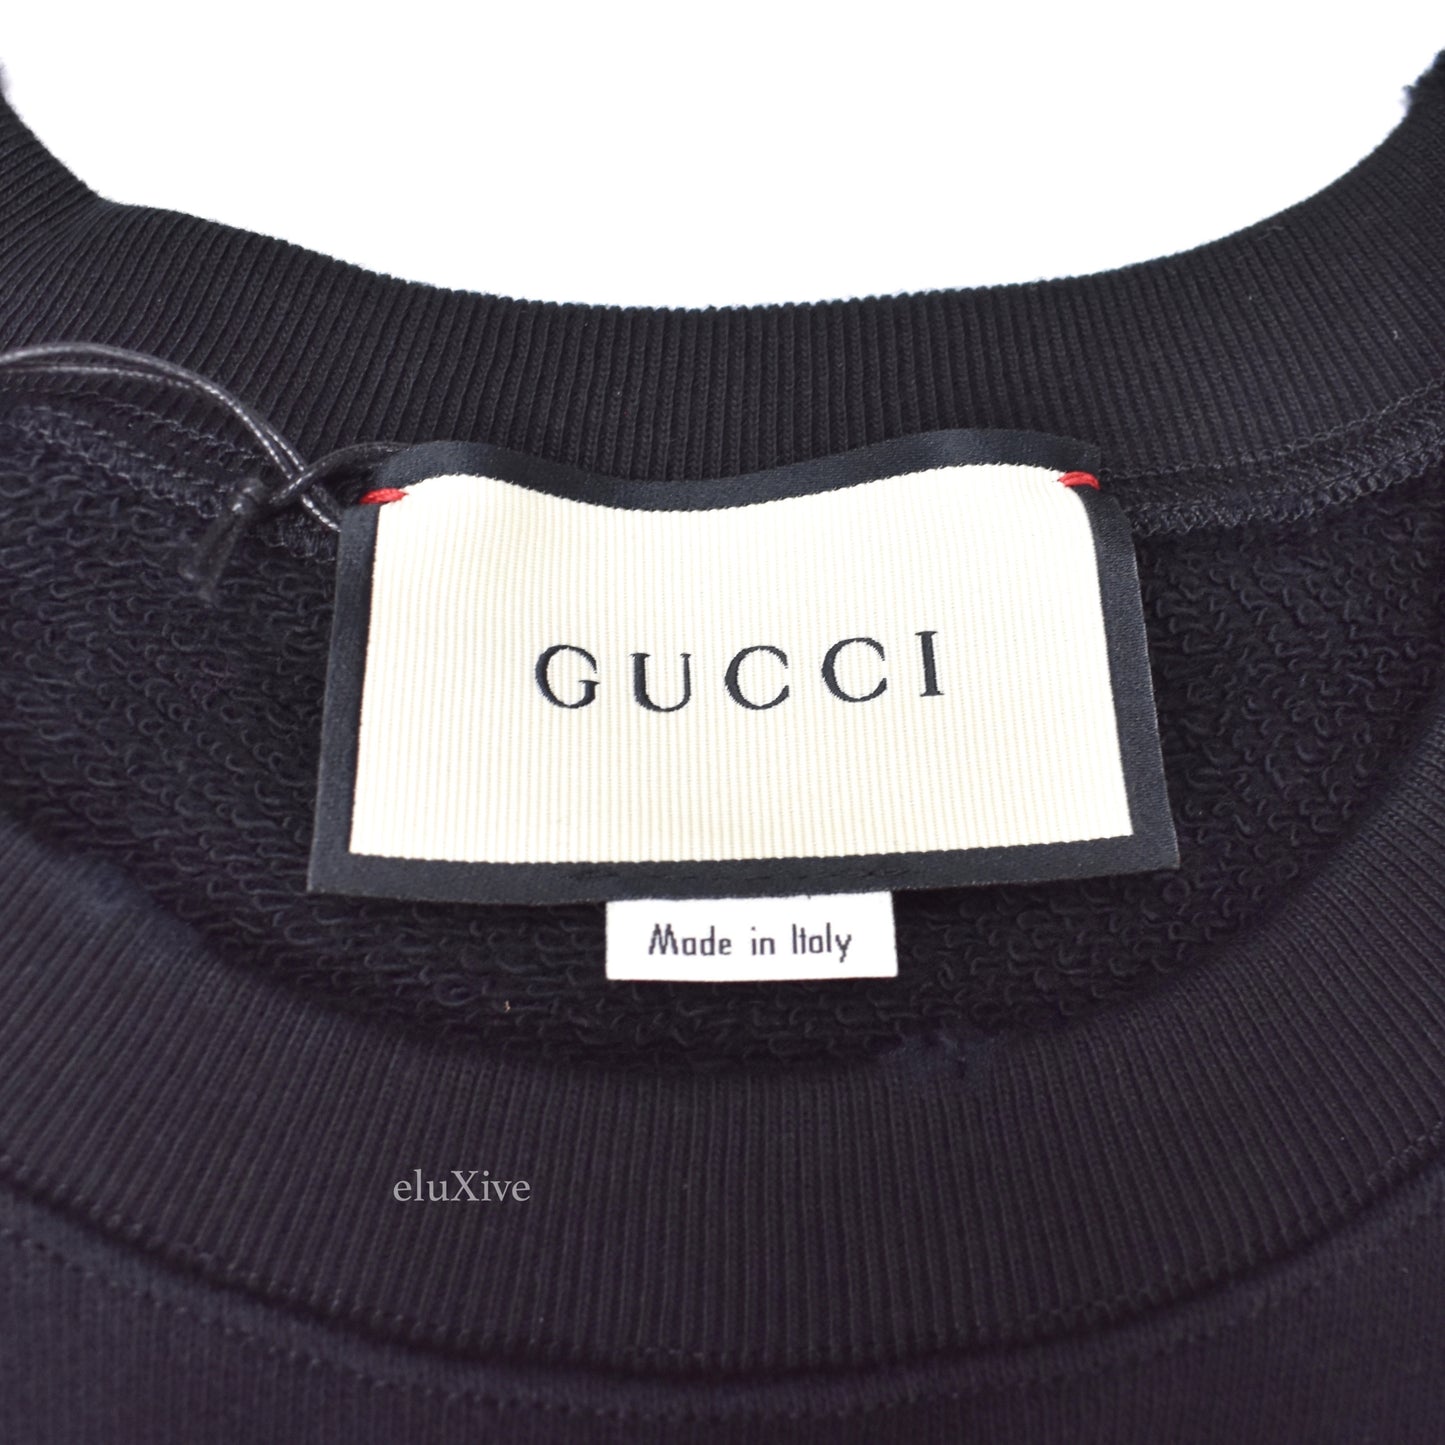 Gucci - Angry Cat Embroidered Sweatshirt